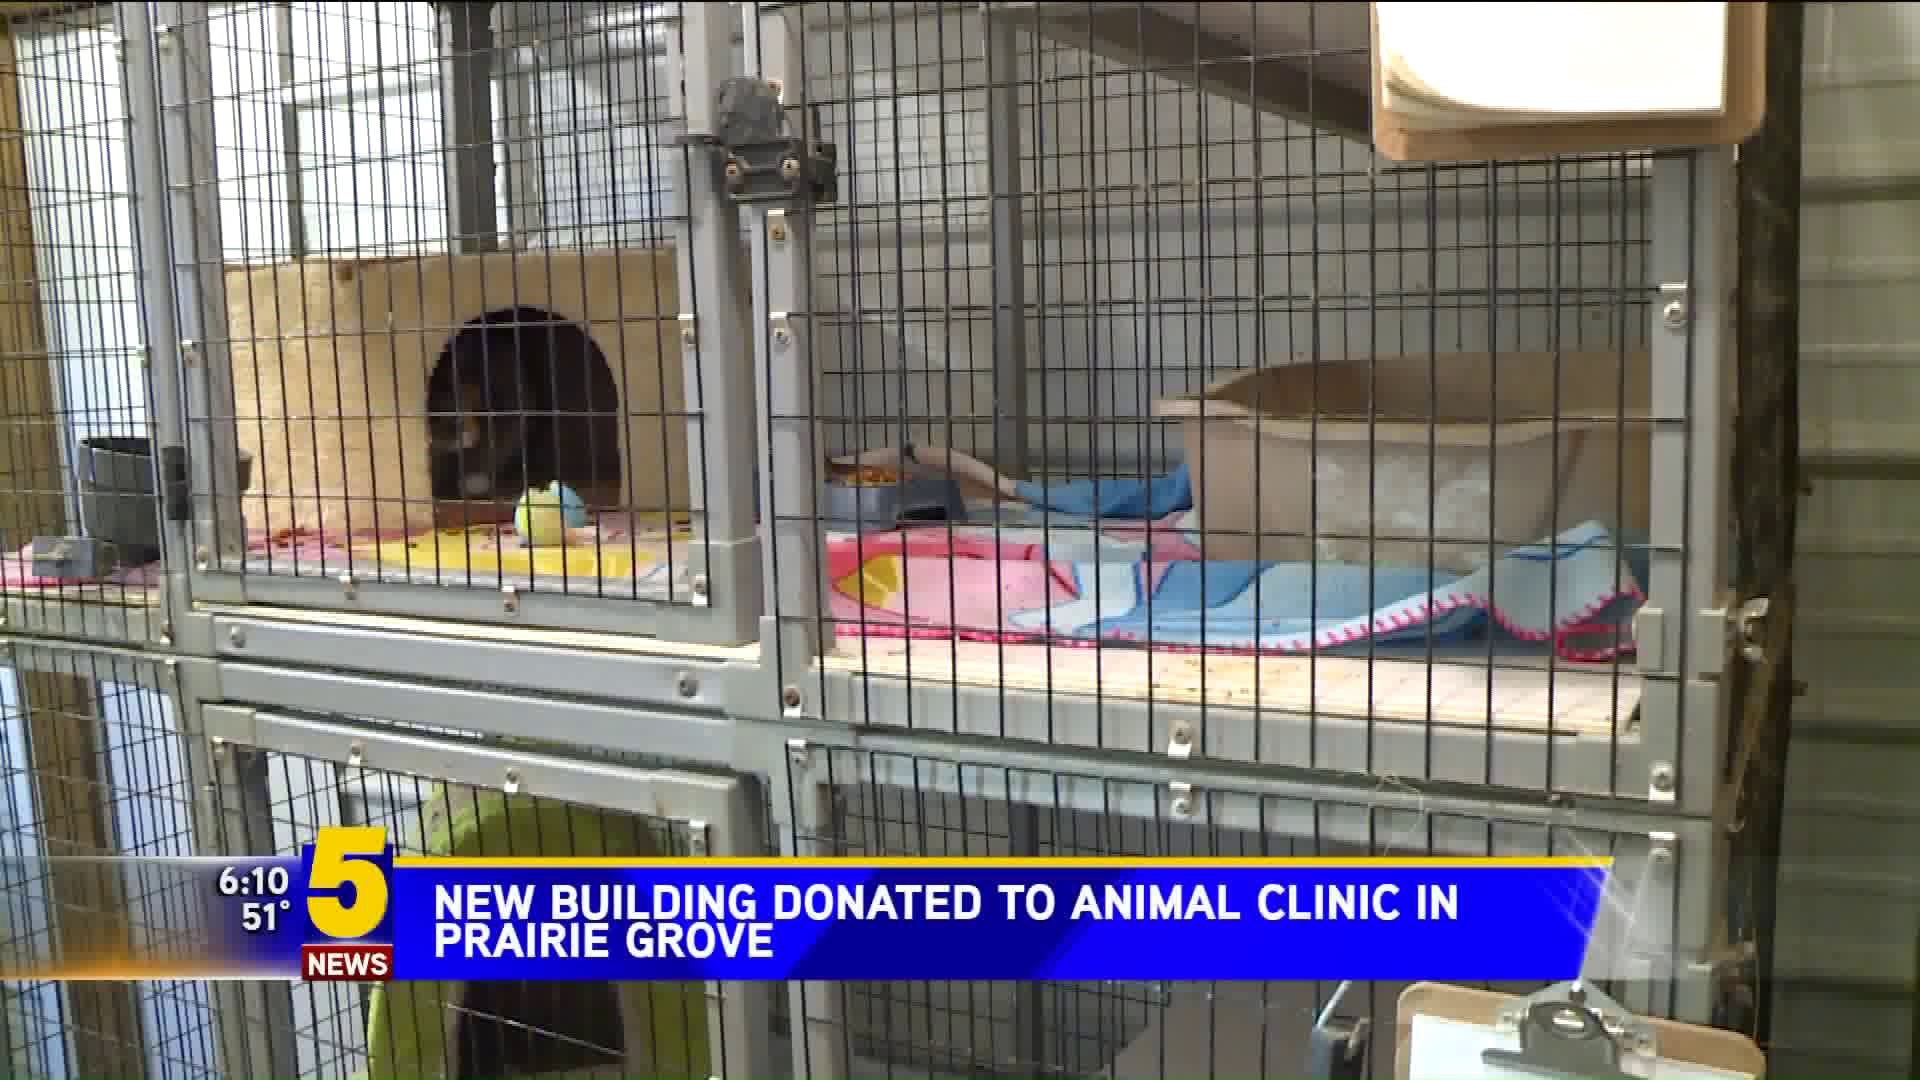 Local Group Receives Building To Provide For Stray Animals